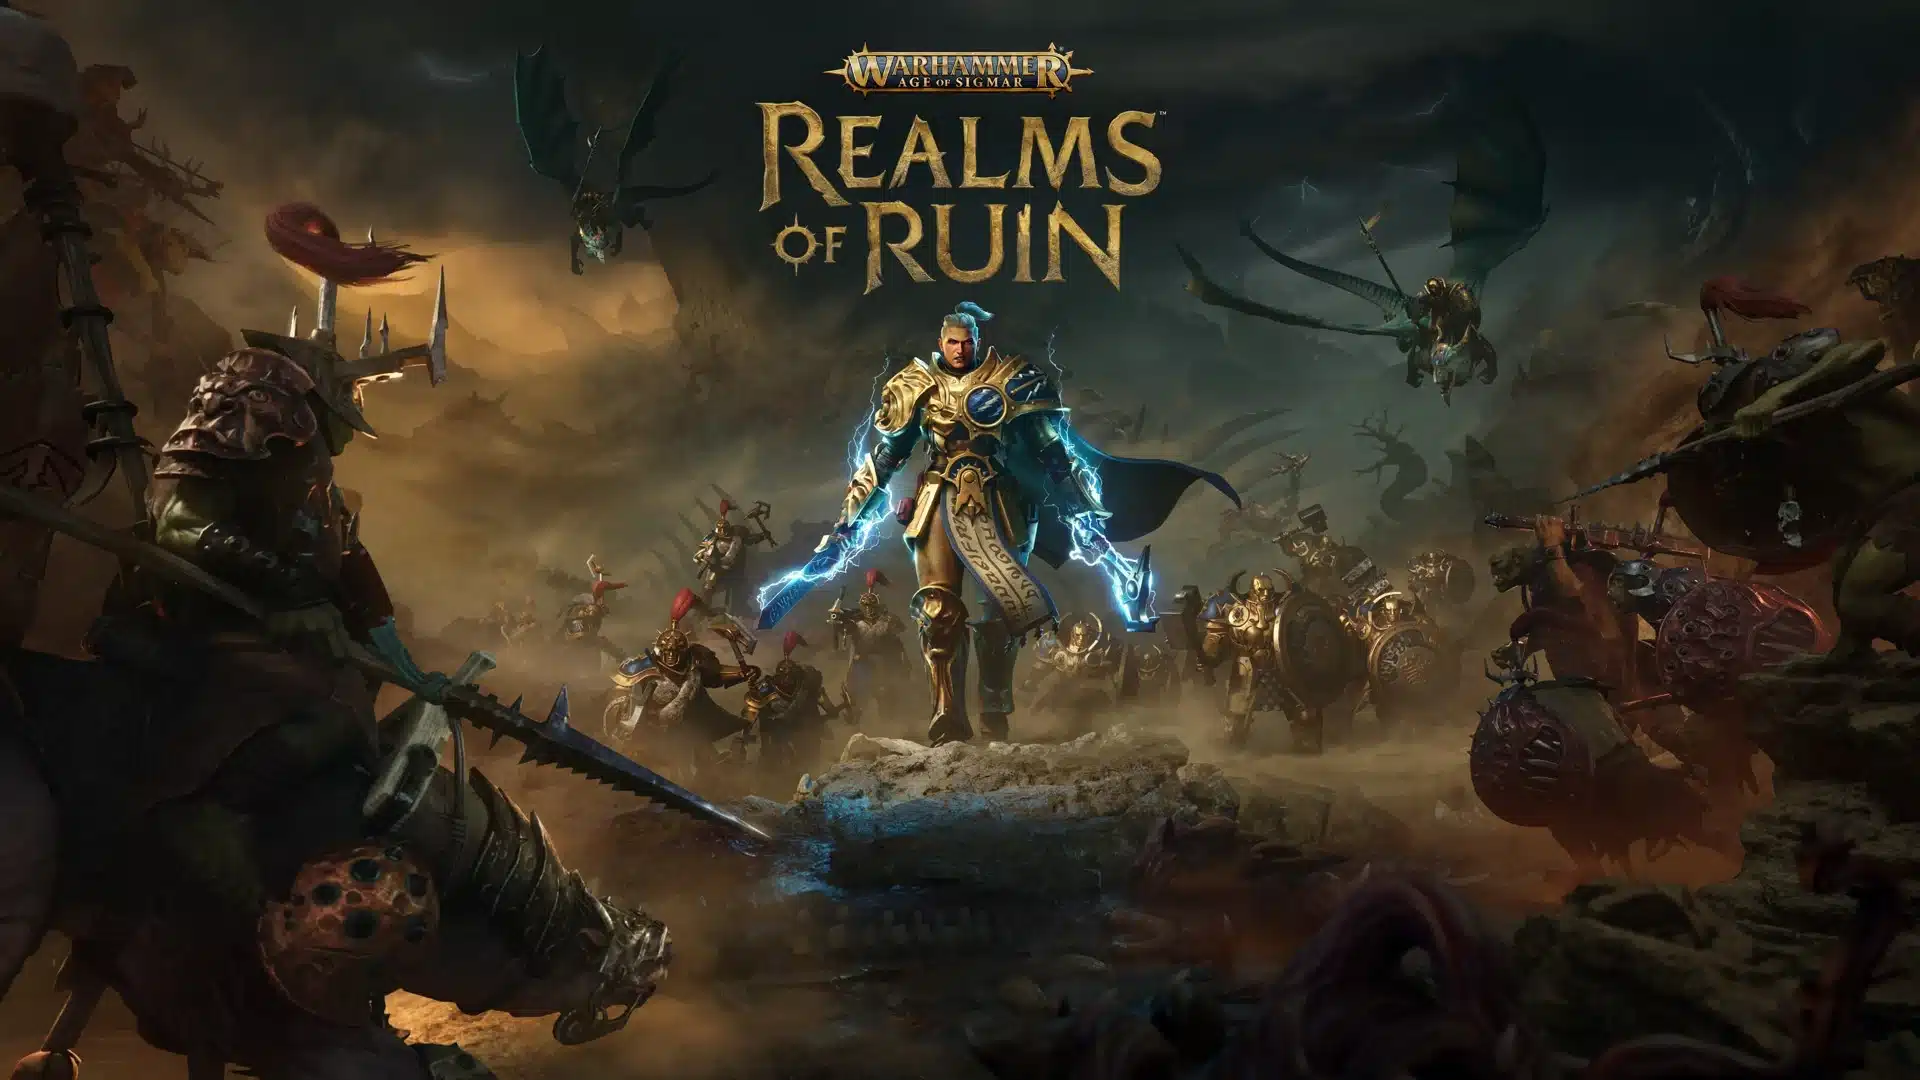 warhammer-age-of-sigmar-realms-of-ruin-7